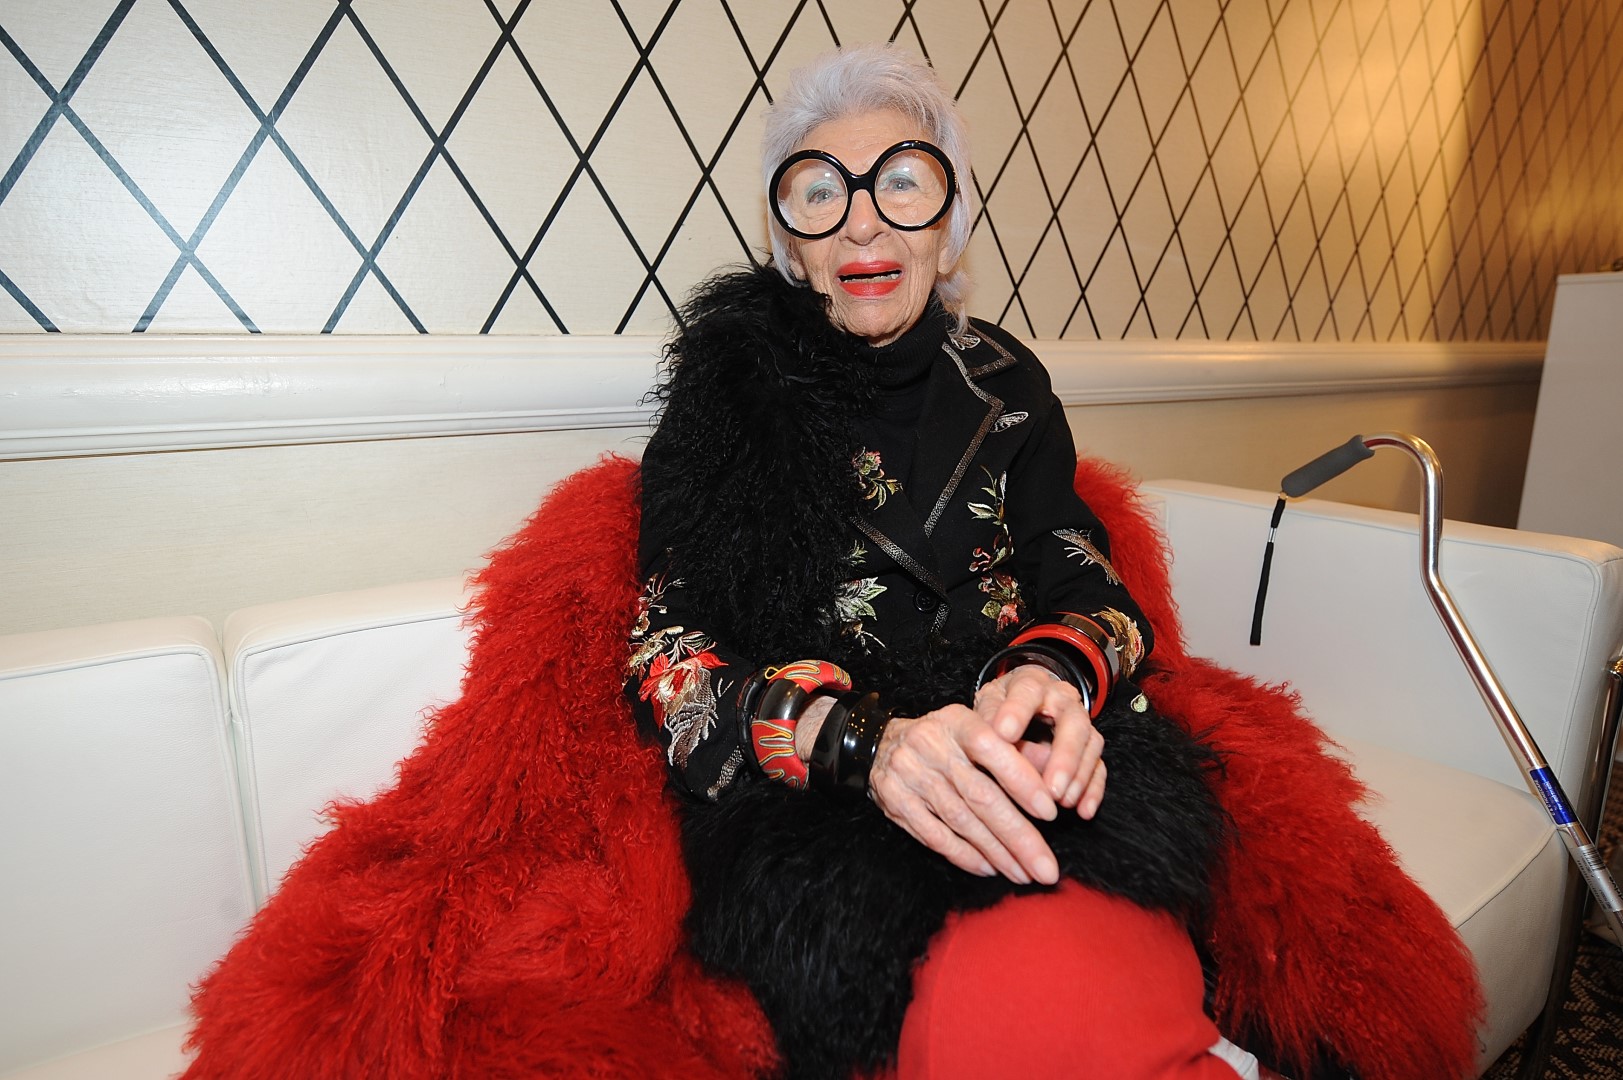 NEW YORK, NY - FEBRUARY 10: Designer Iris Apfel attends the HSN Fashion Week Lounge At The Empire Hotel on February 10, 2014 in New York City. (Photo by Brad Barket/Getty Images for HSN)